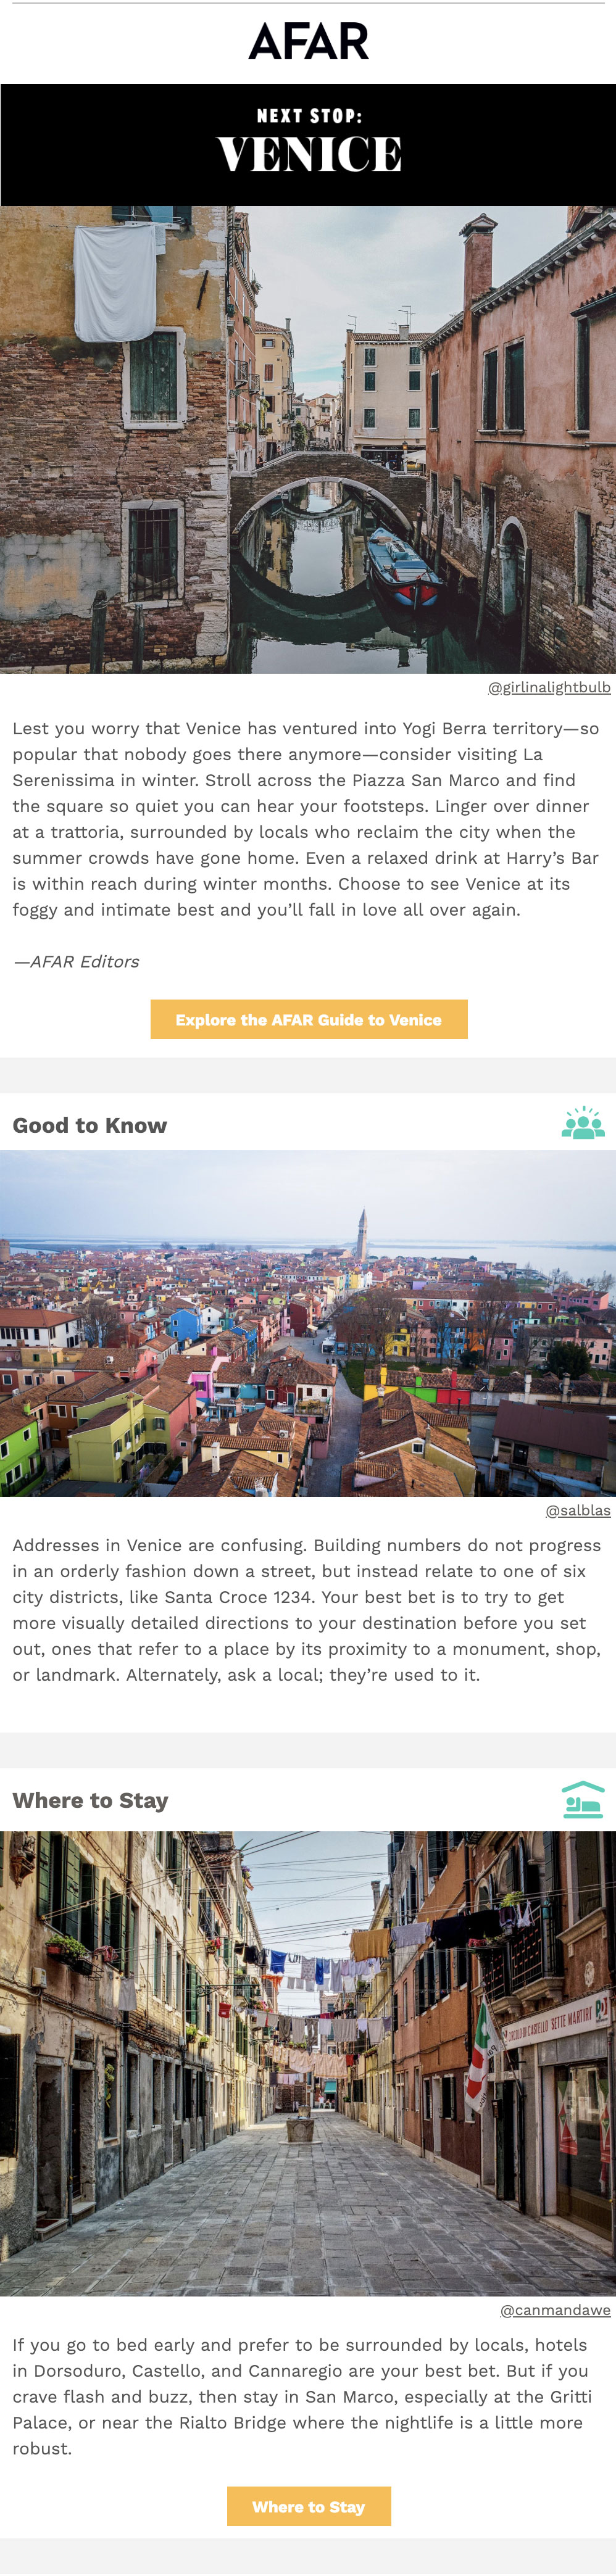 Afar travel email roundup